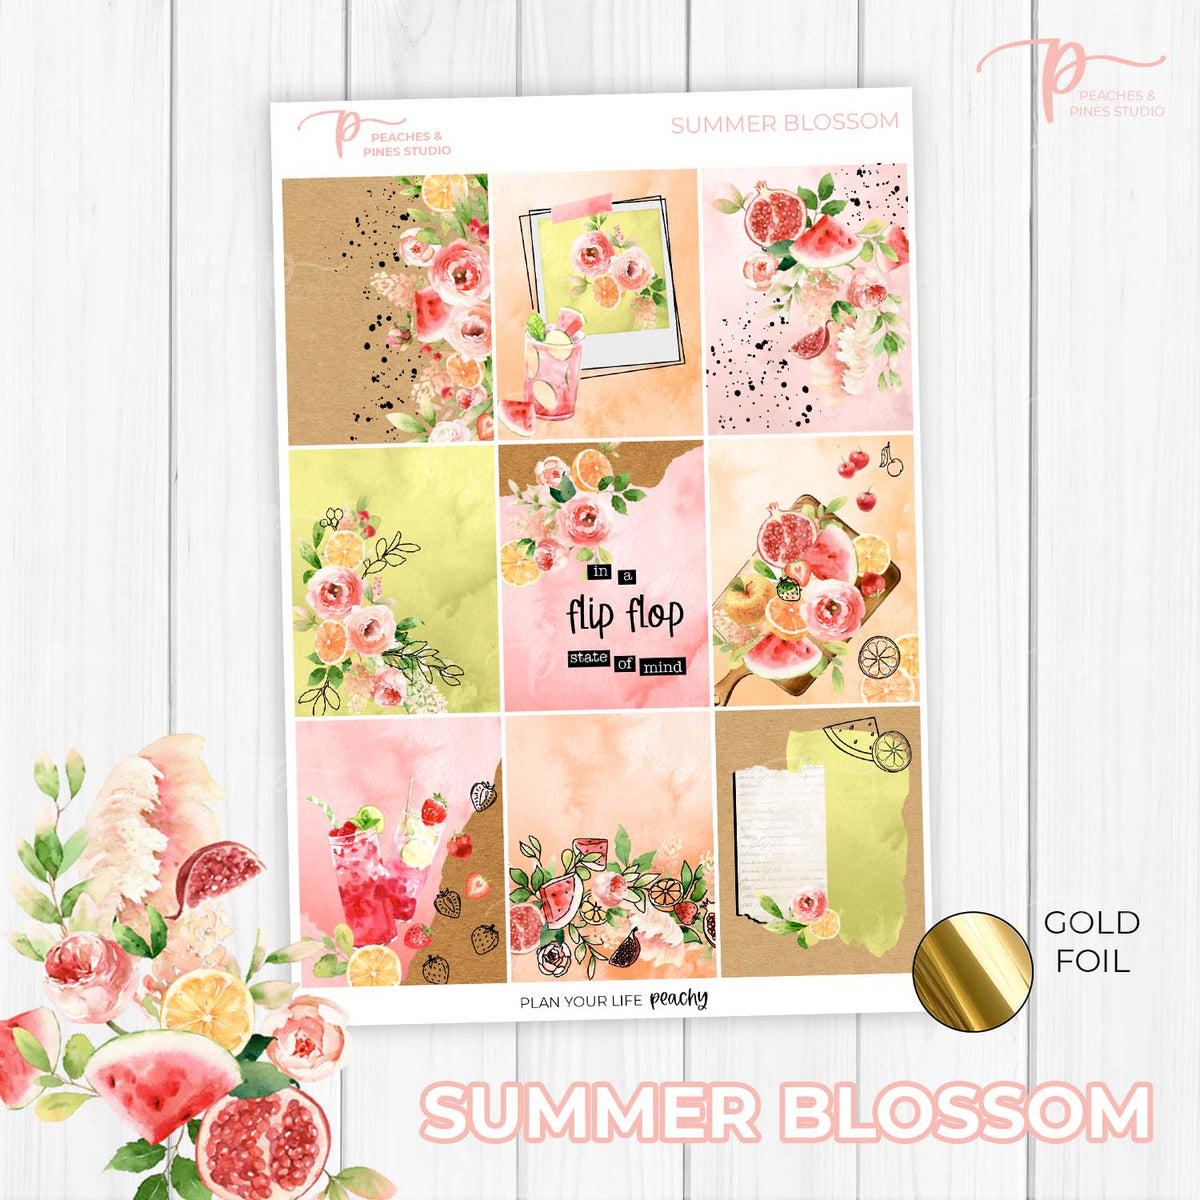 Summer Blossom - Foiled Weekly Kit